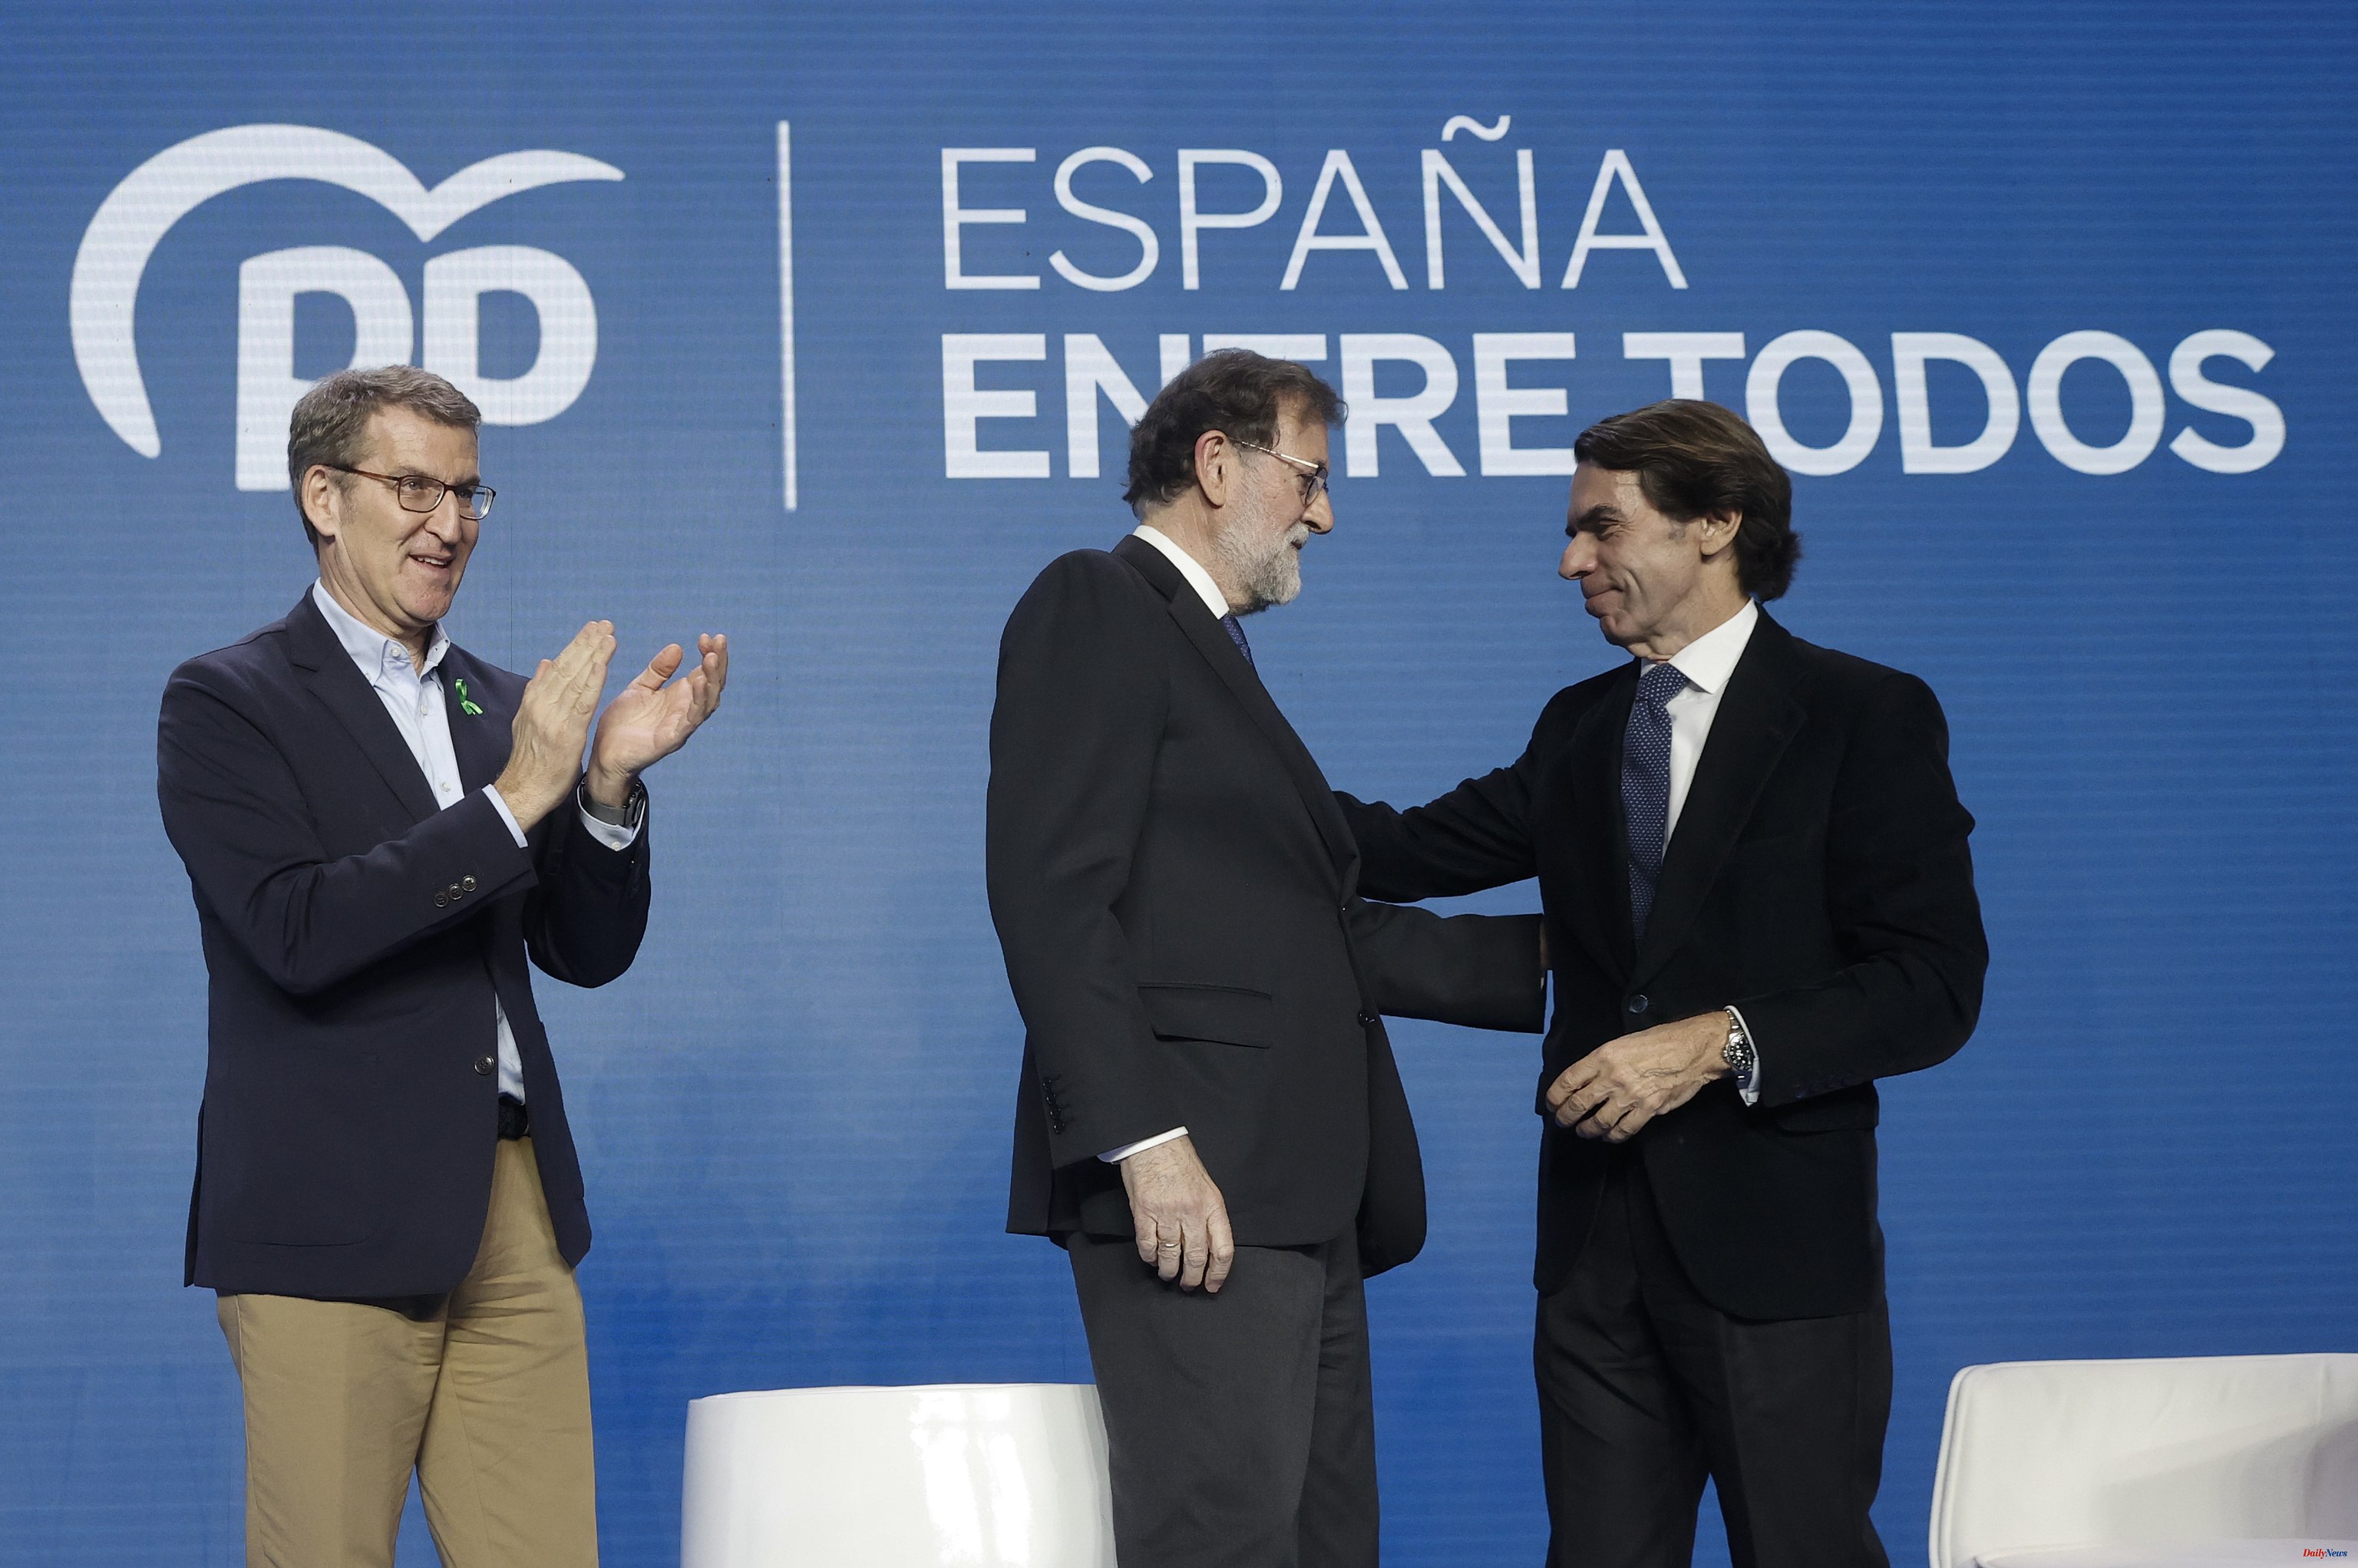 Aznar and Rajoy policy, "at the disposal" of Feijóo: "Whenever and wherever you want"